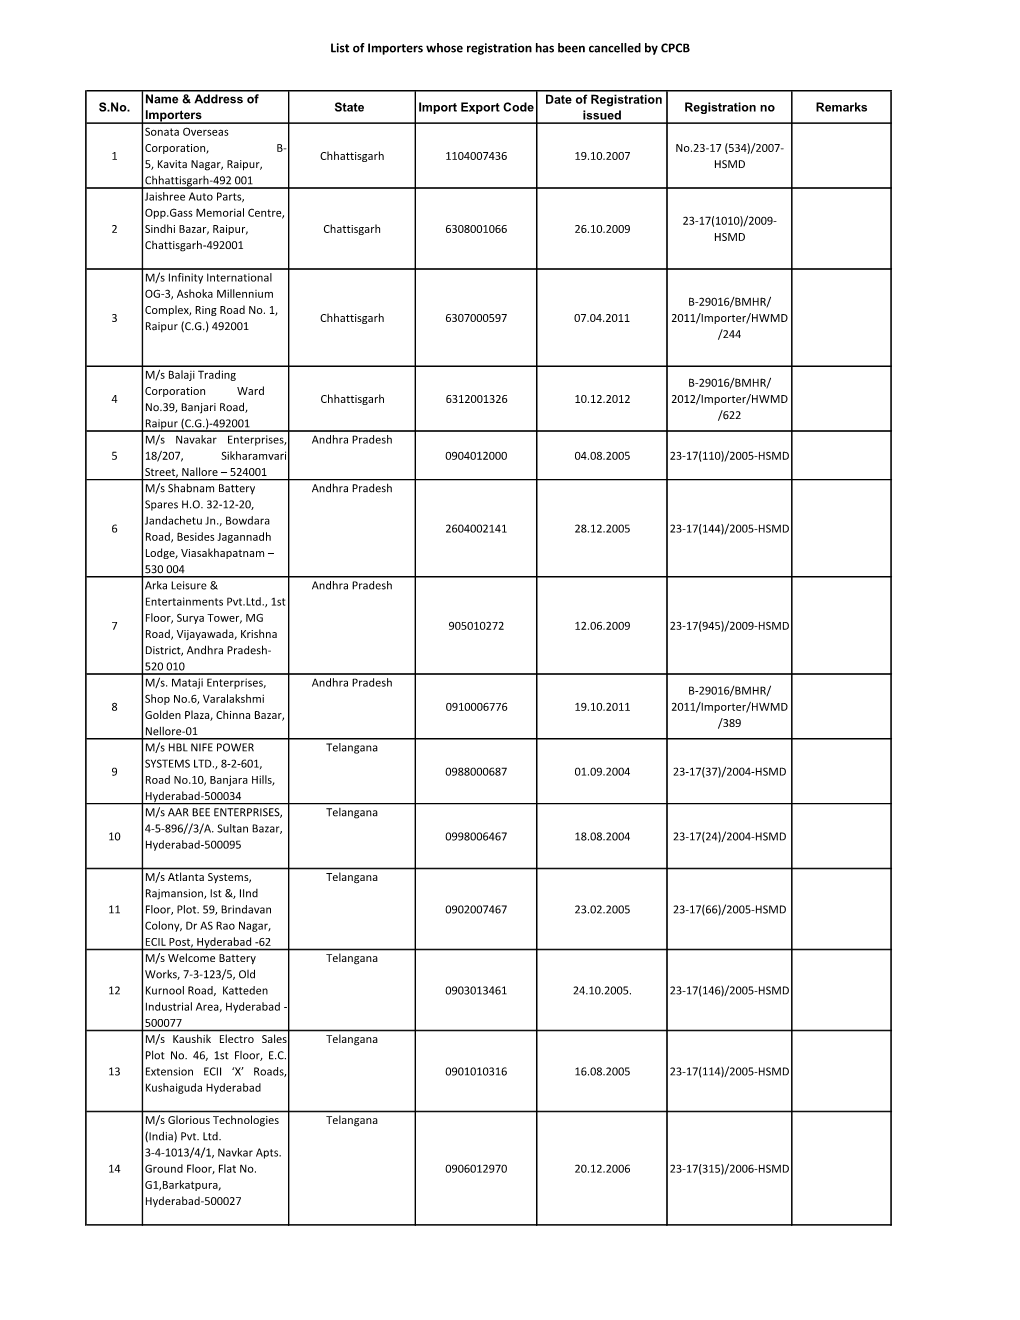 List of Importers Whose Registration Has Been Cancelled by CPCB